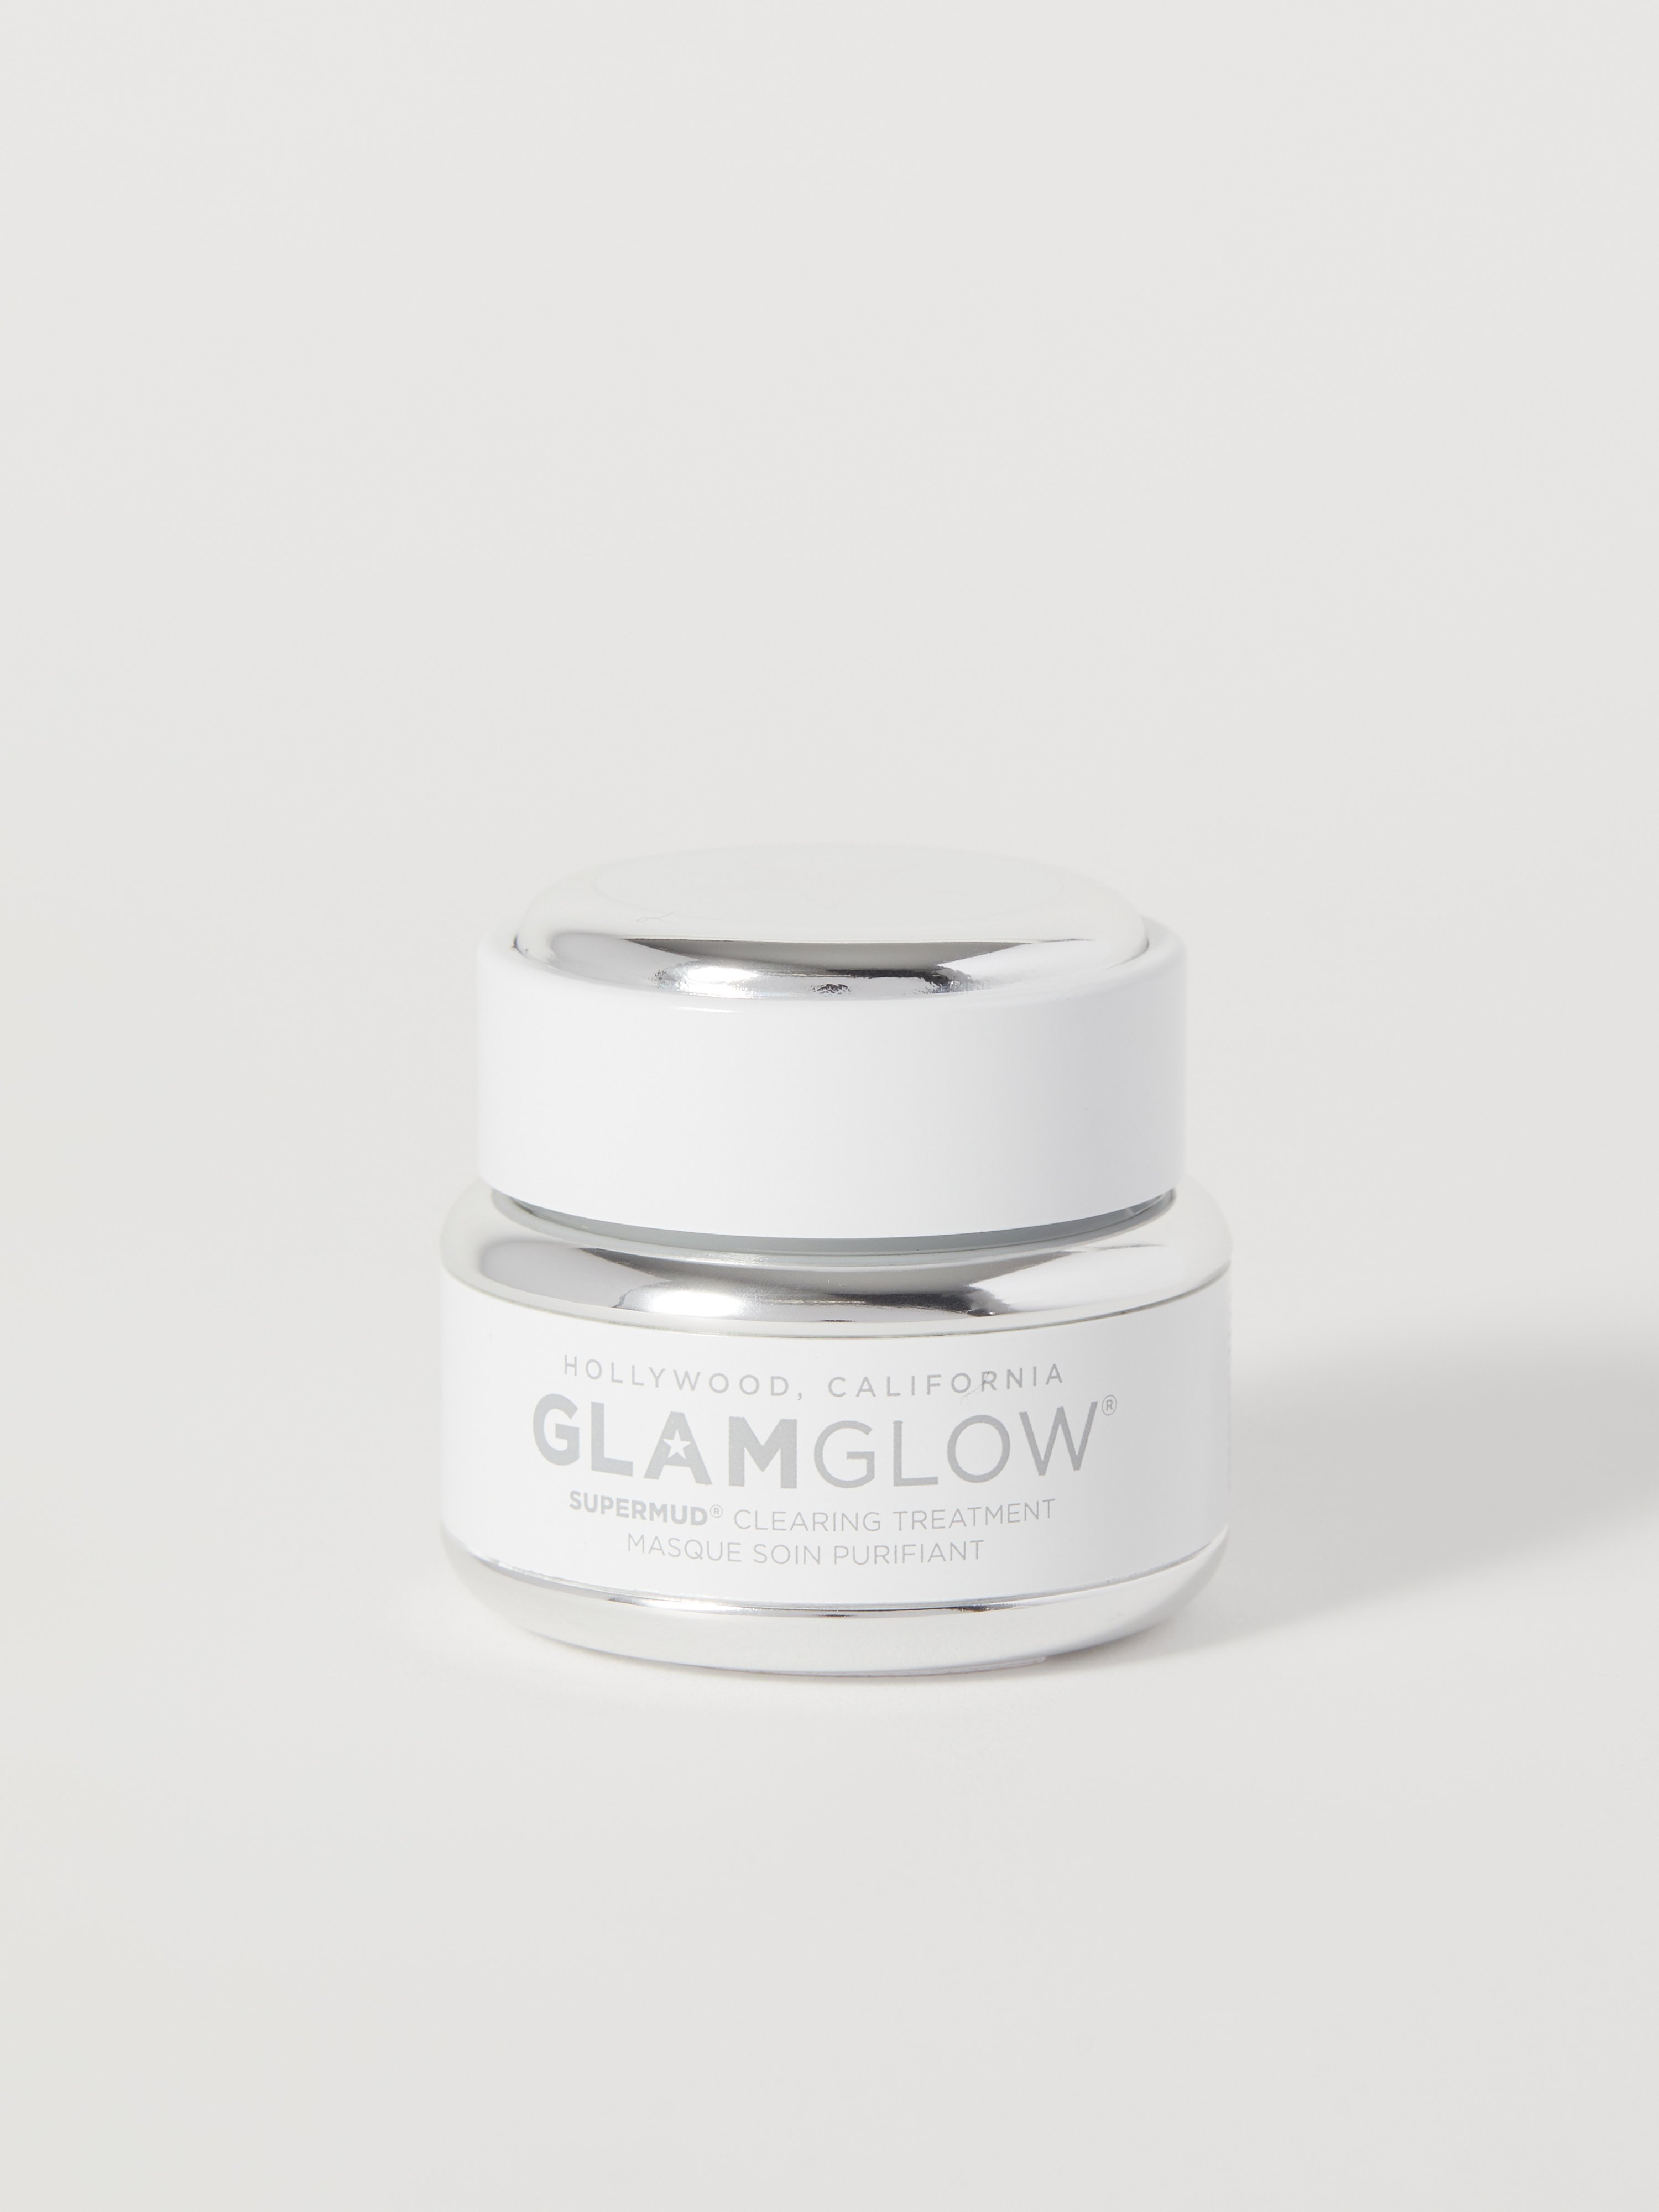 GLAMGLOW GLAMGLOW SUPERMUD CLEARING TREATMENT